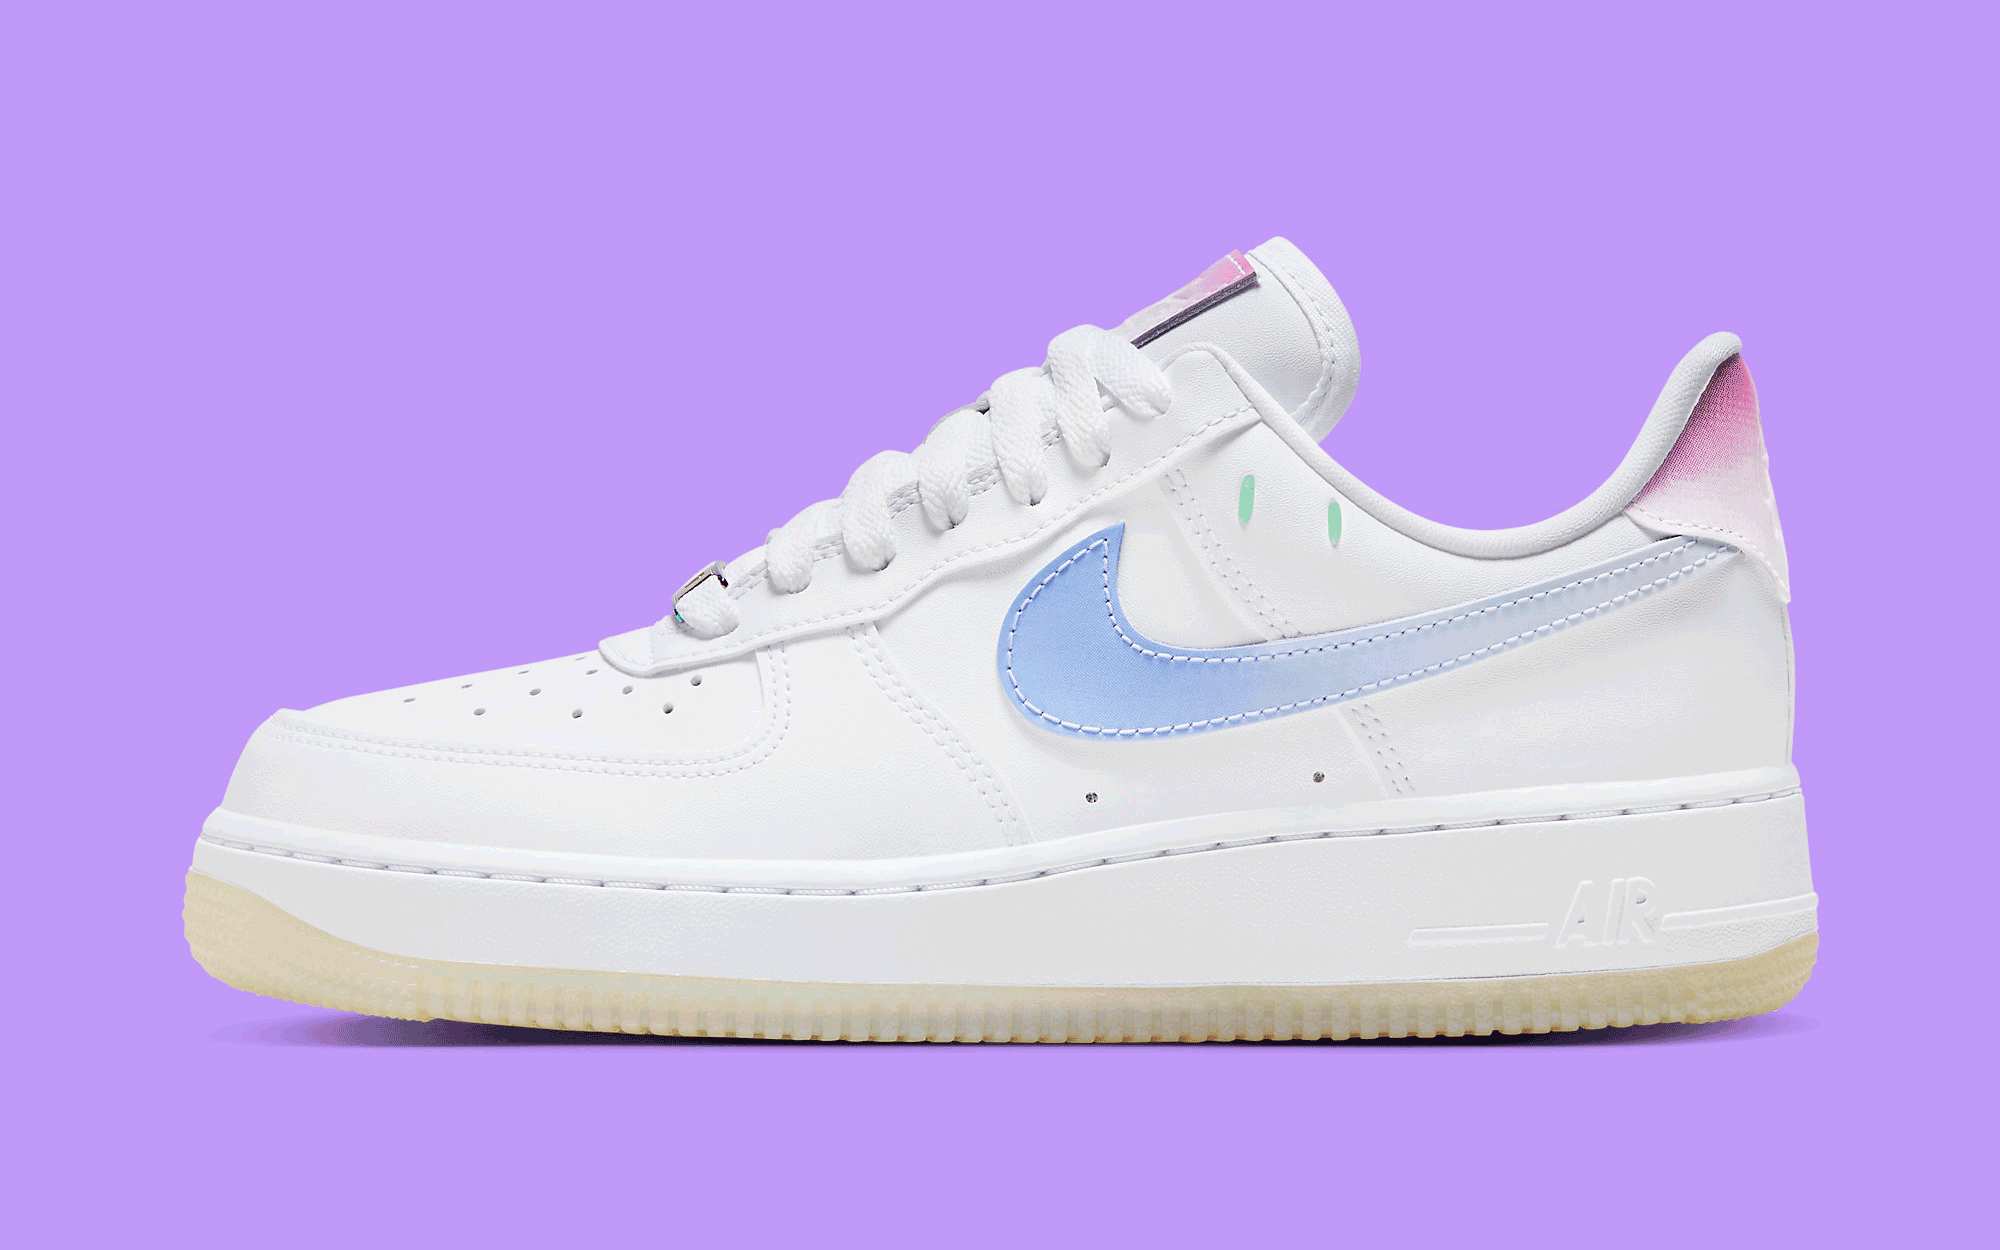 ColorChanging UV Swooshes Surface on the Air Force 1 Low for Spring